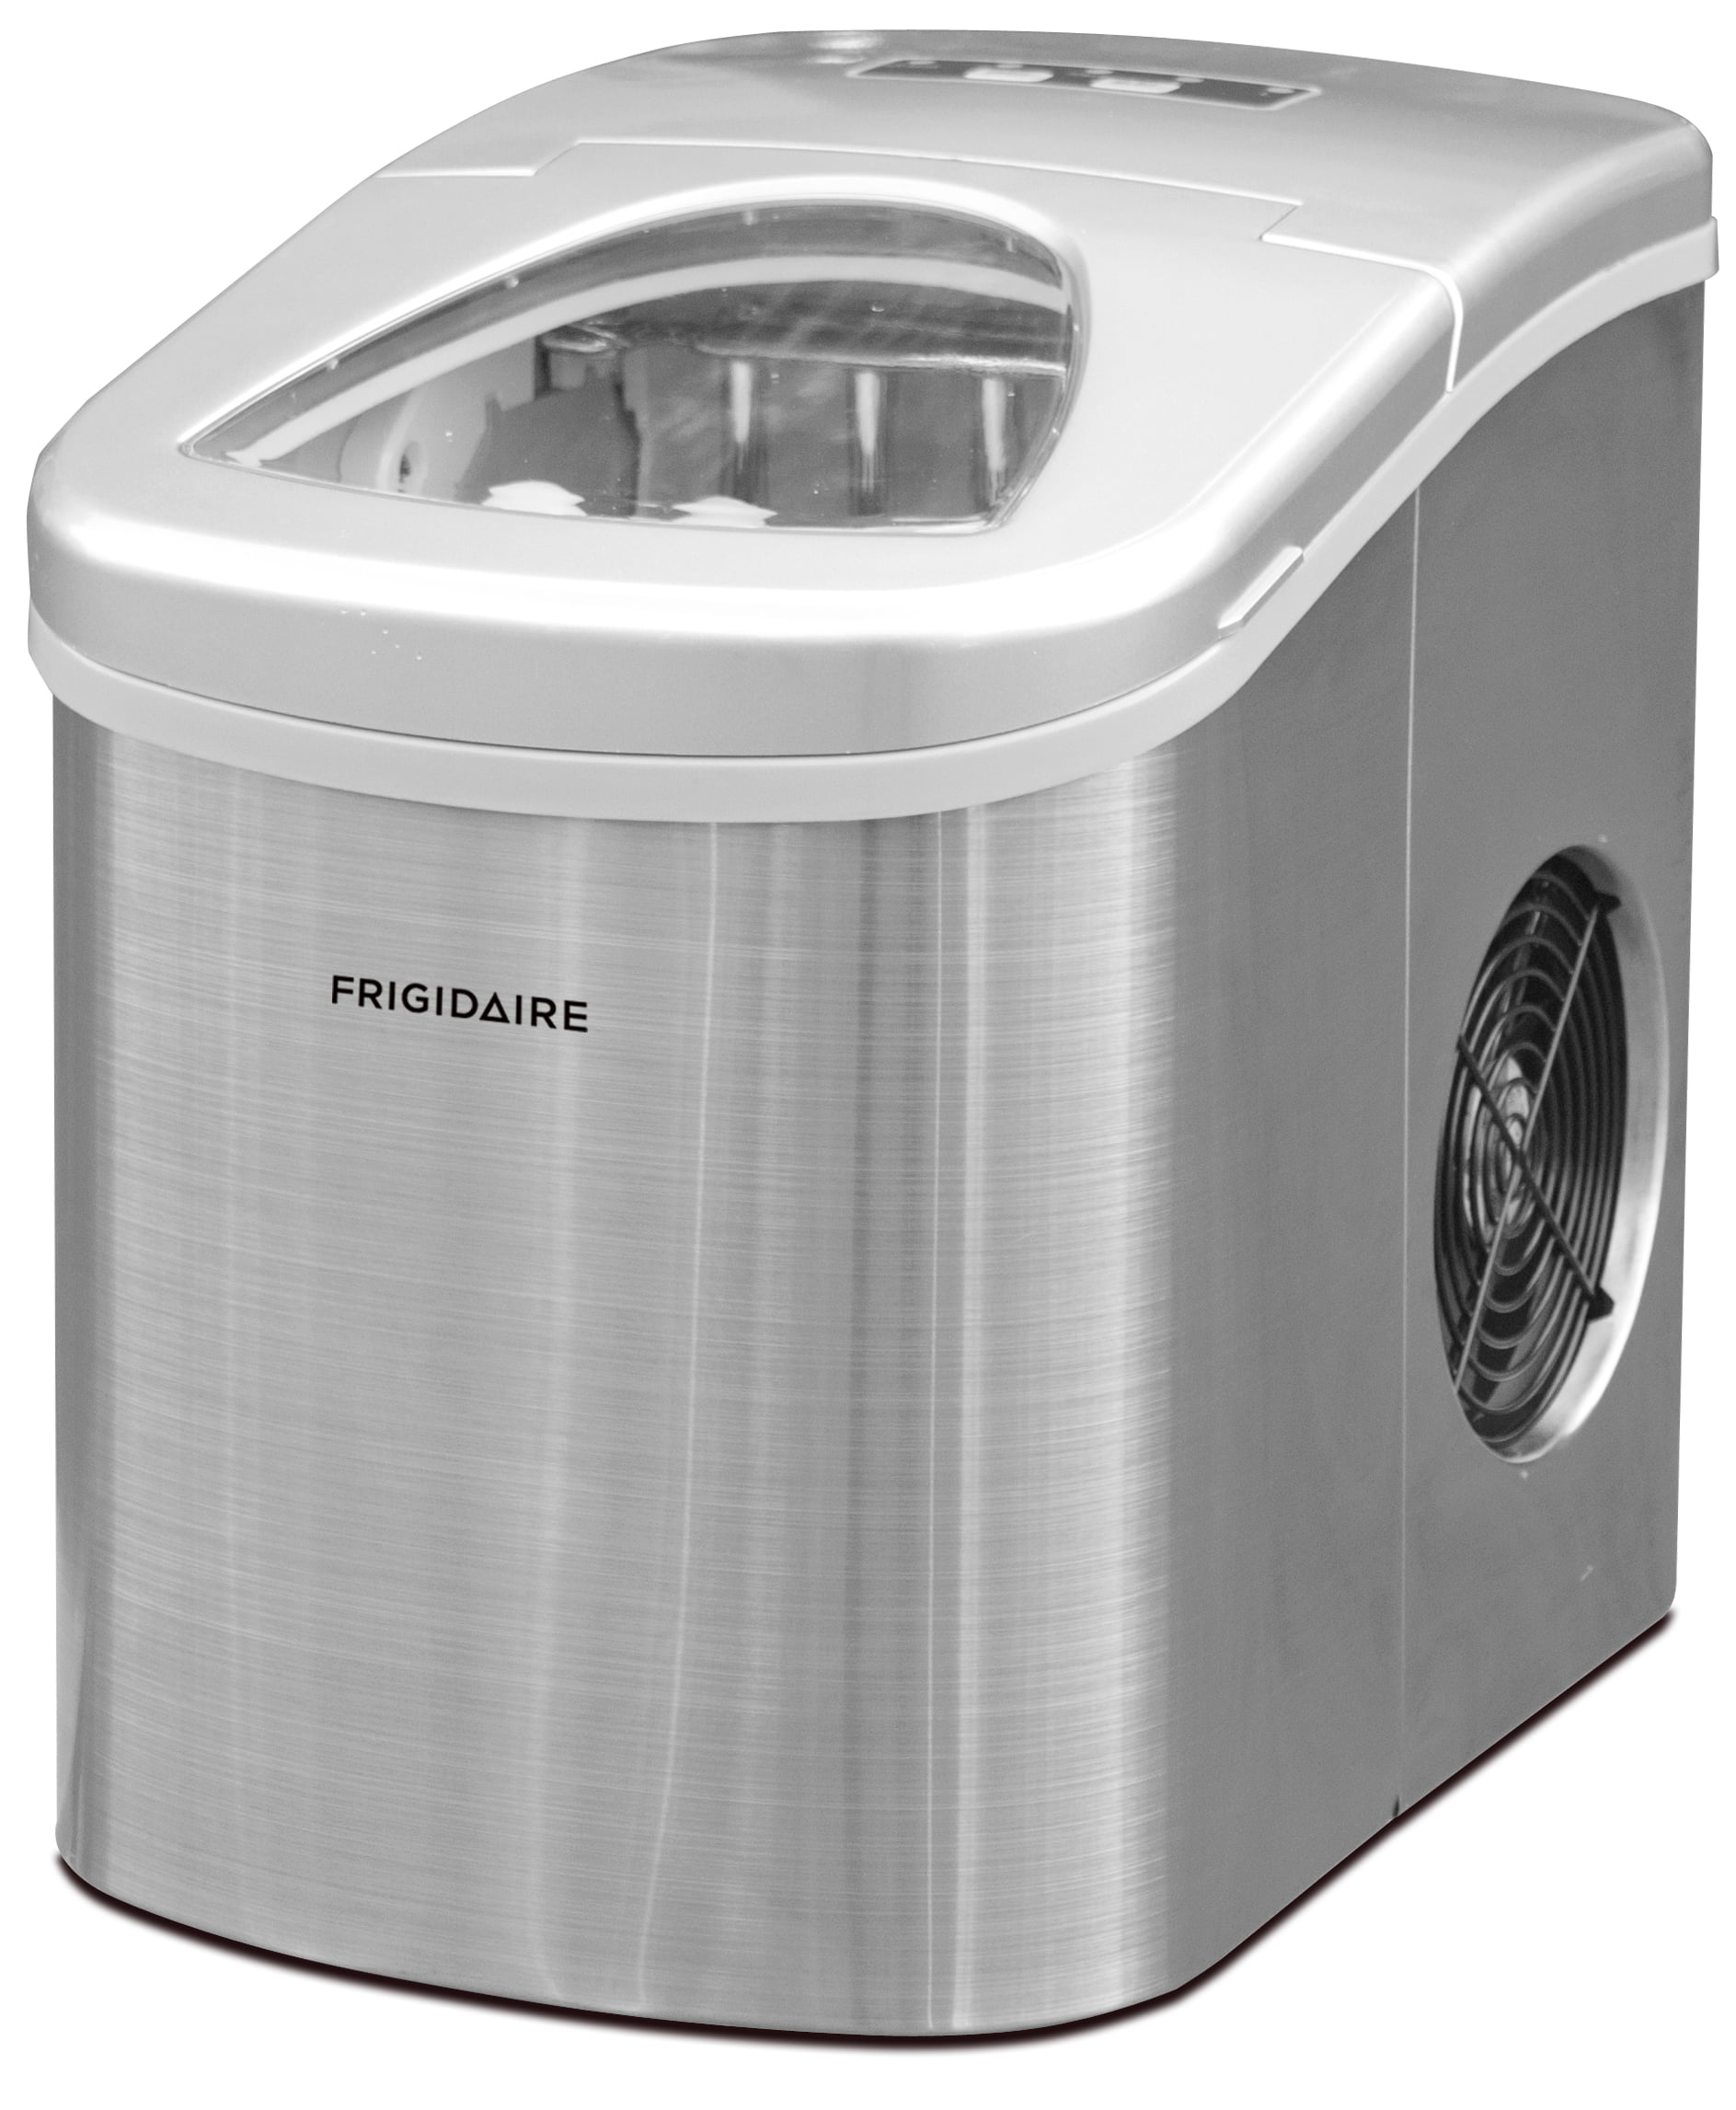 Frigidaire 26 lb. Countertop Ice Maker EFIC117-SS, Stainless Steel Frigidaire 26 Lb Countertop Ice Maker Efic117 Ss Stainless Steel